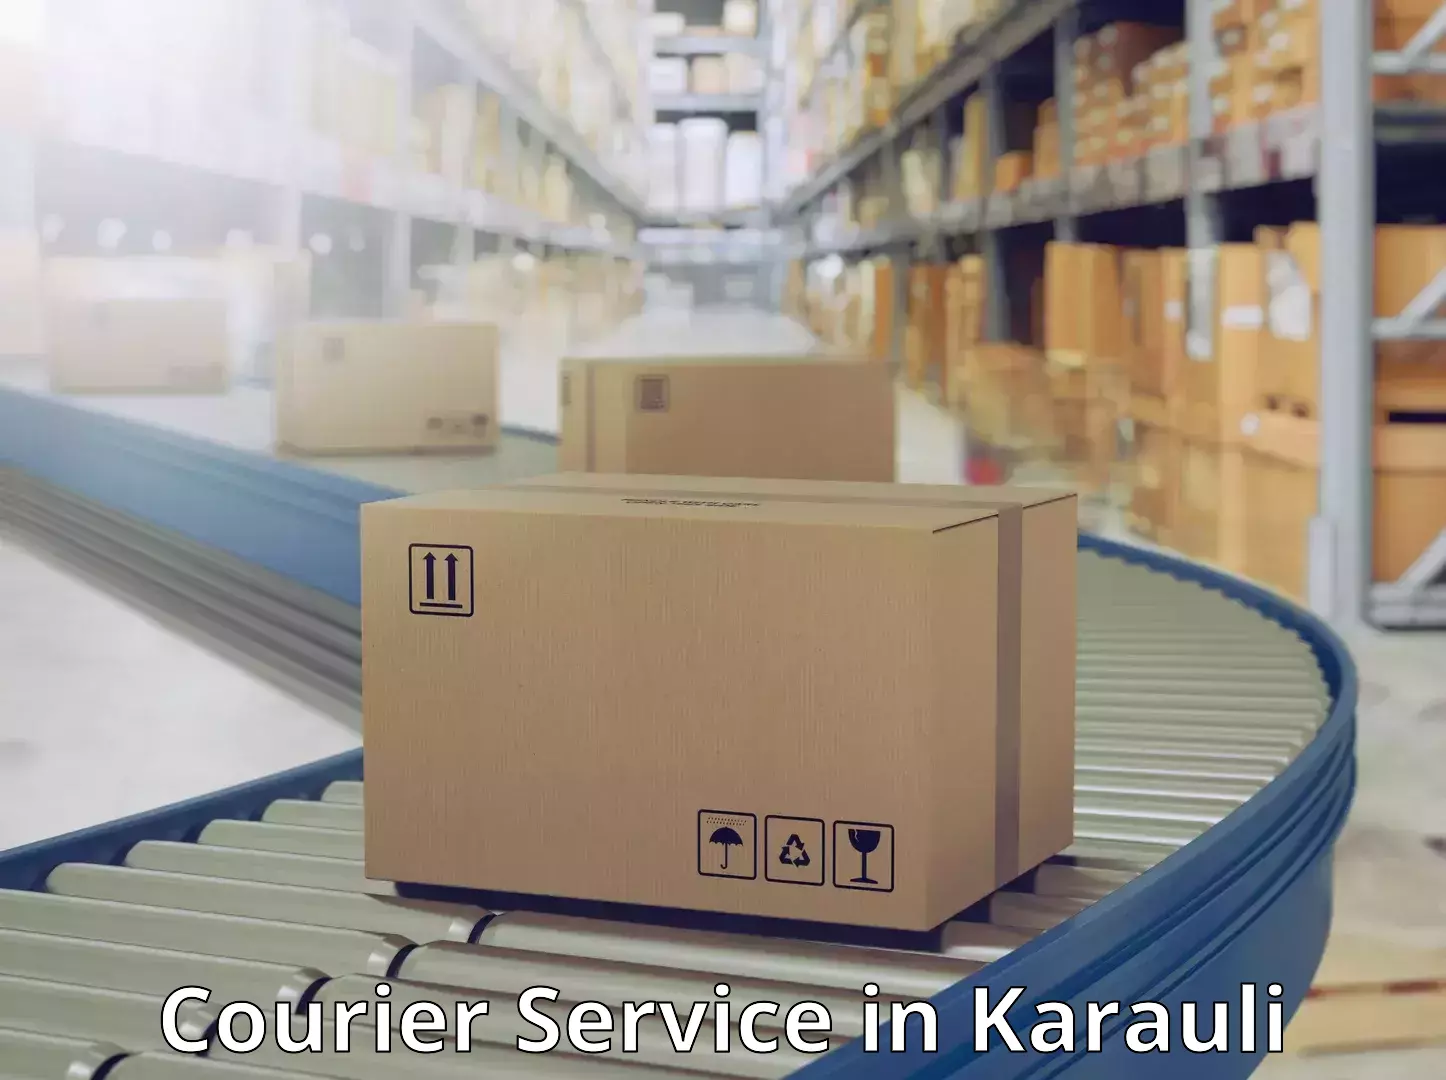 Flexible delivery schedules in Karauli